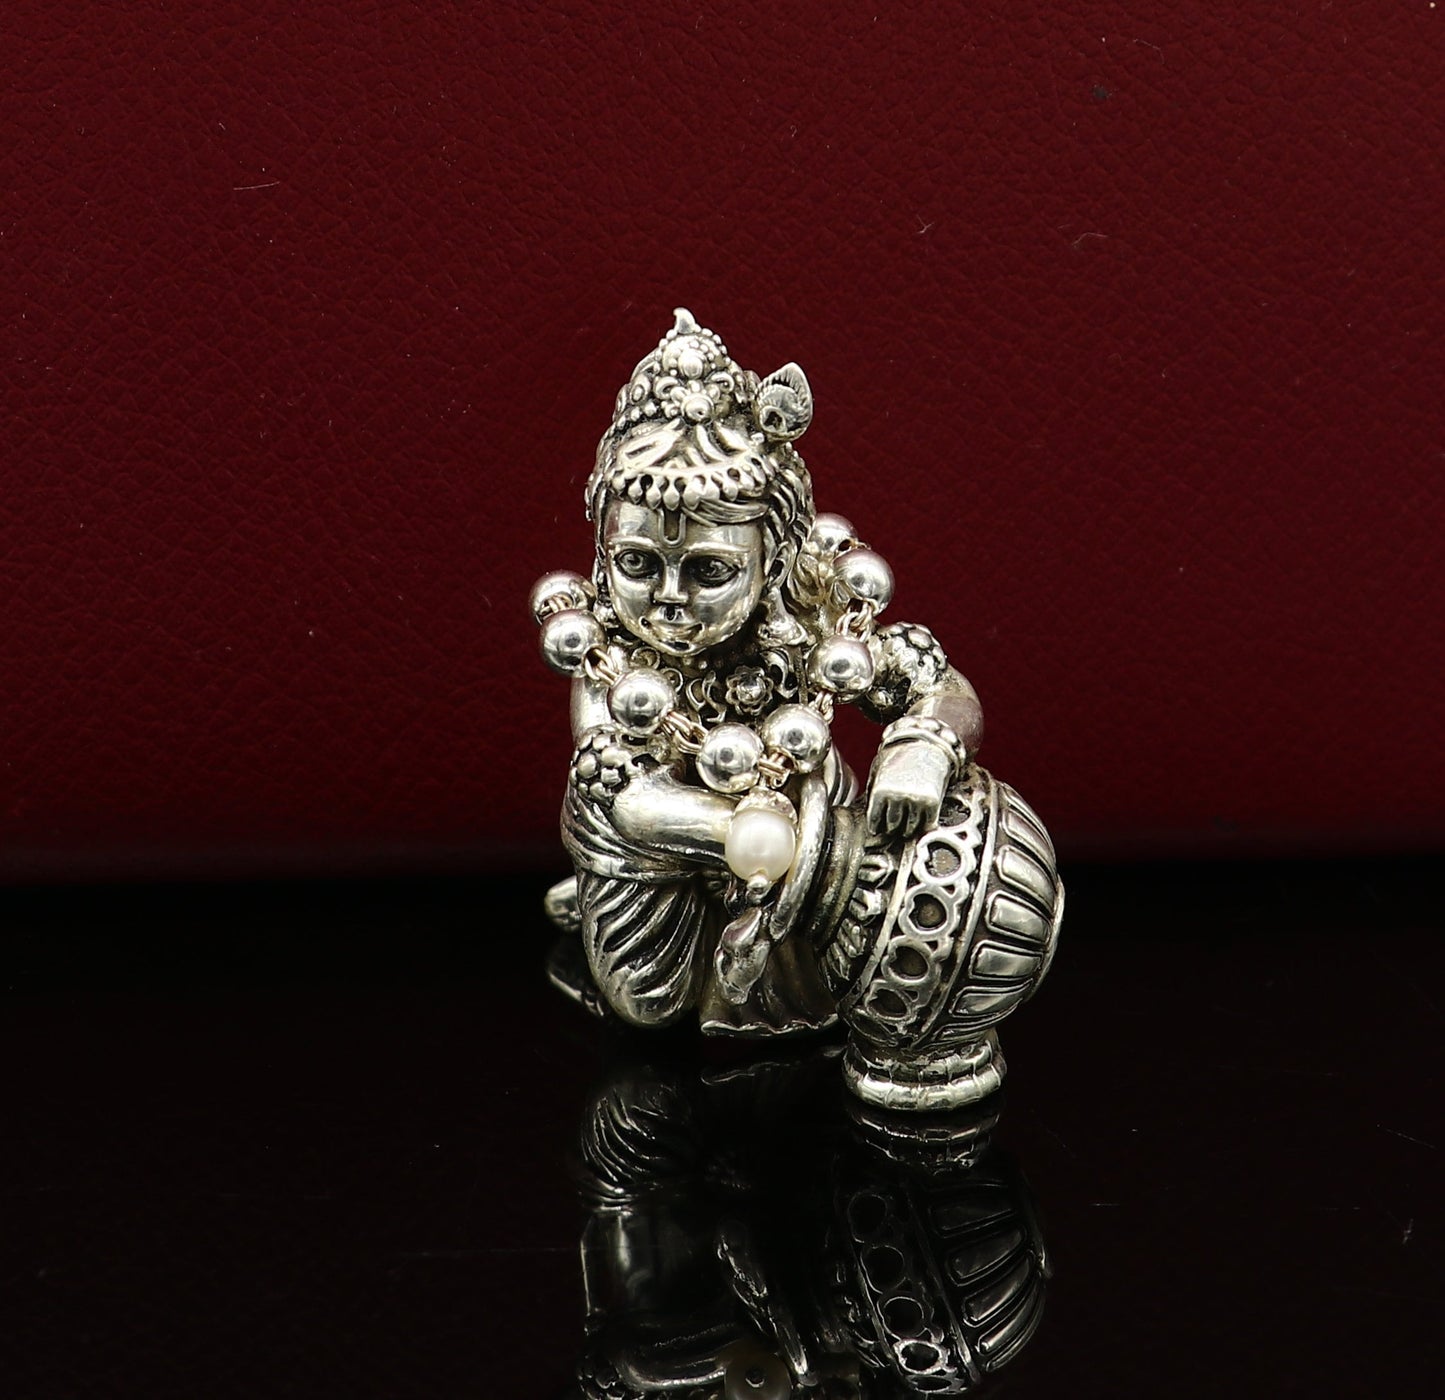 2" inches long handmade sterling silver beaded bracelet or necklace for baby krishna figurine or sculpture, best puja necklace sbr224 - TRIBAL ORNAMENTS